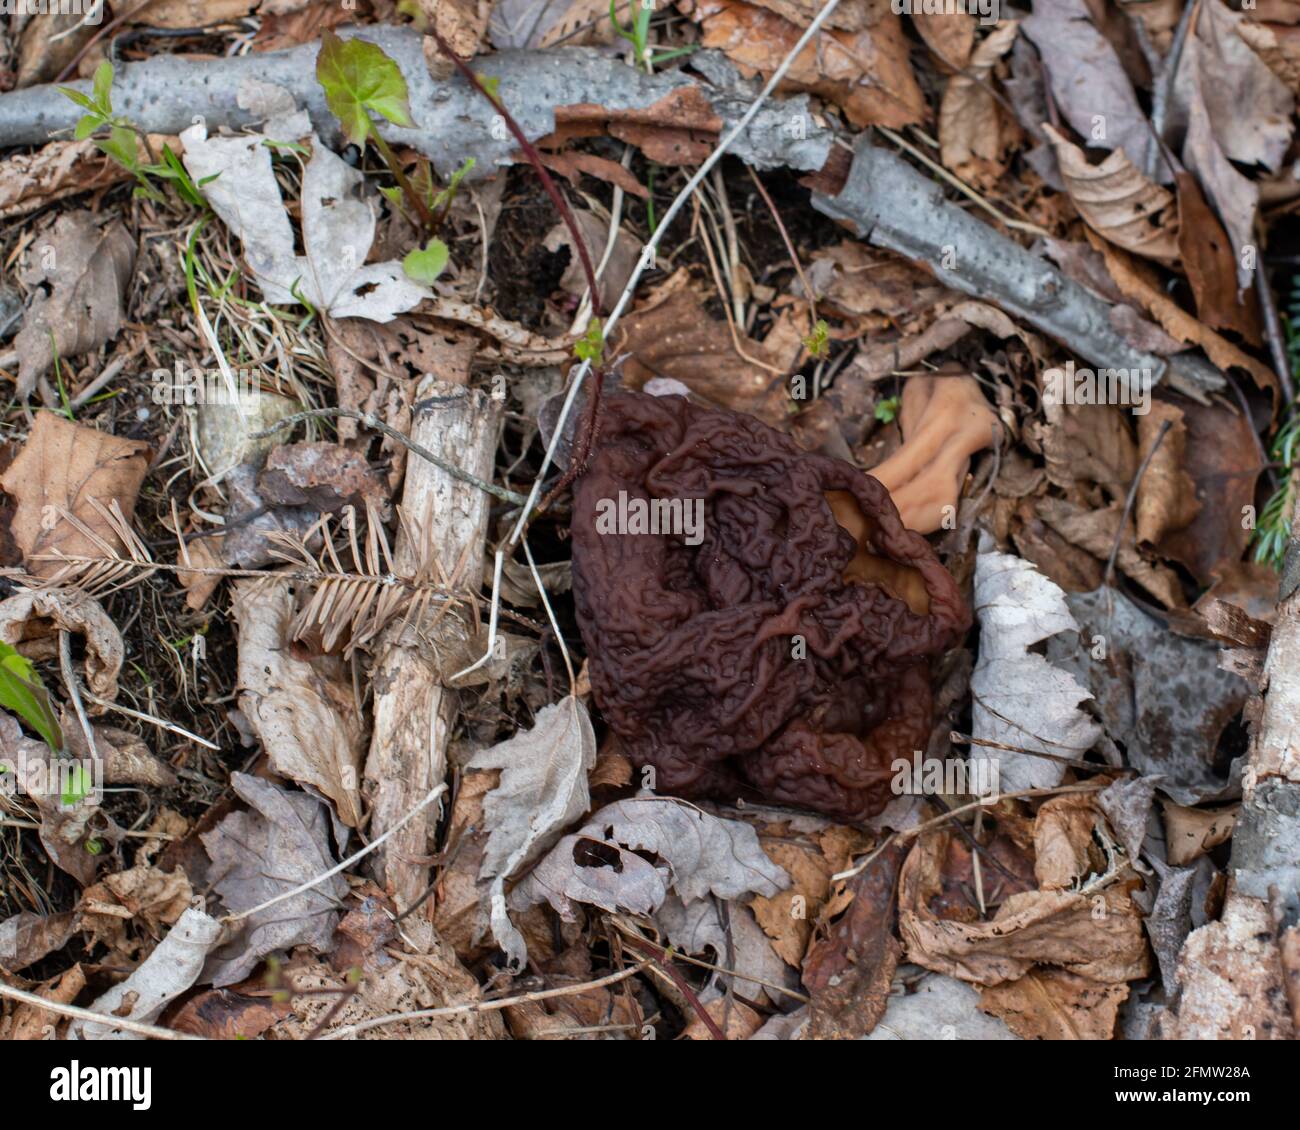 A big red false morel mushroom, Gyromitra esculenta, growing on the forest floor in the Adirondack Mountains, NY wilderness in early spring. Stock Photo